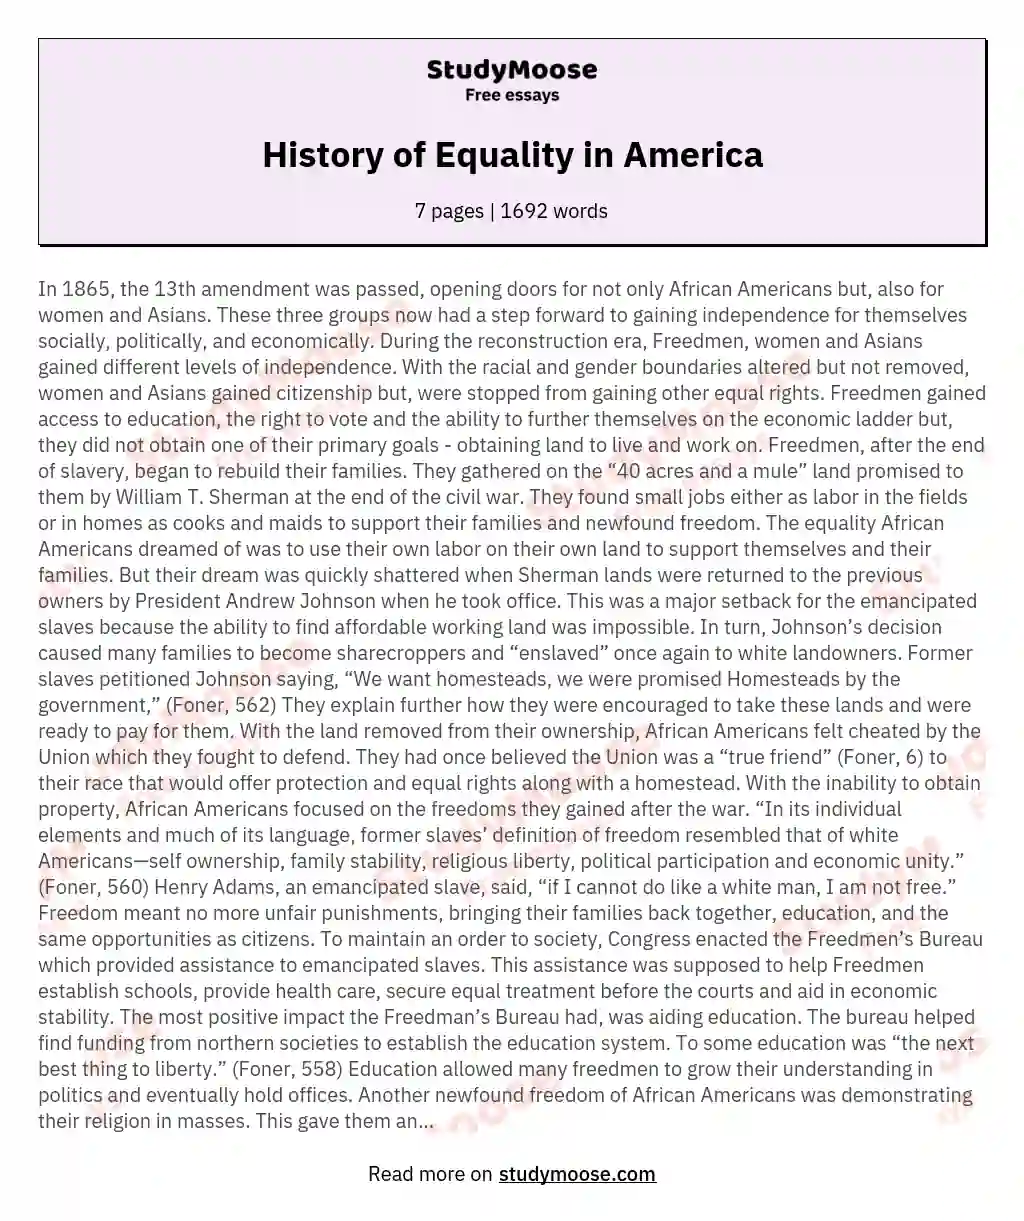 History of Equality in America essay